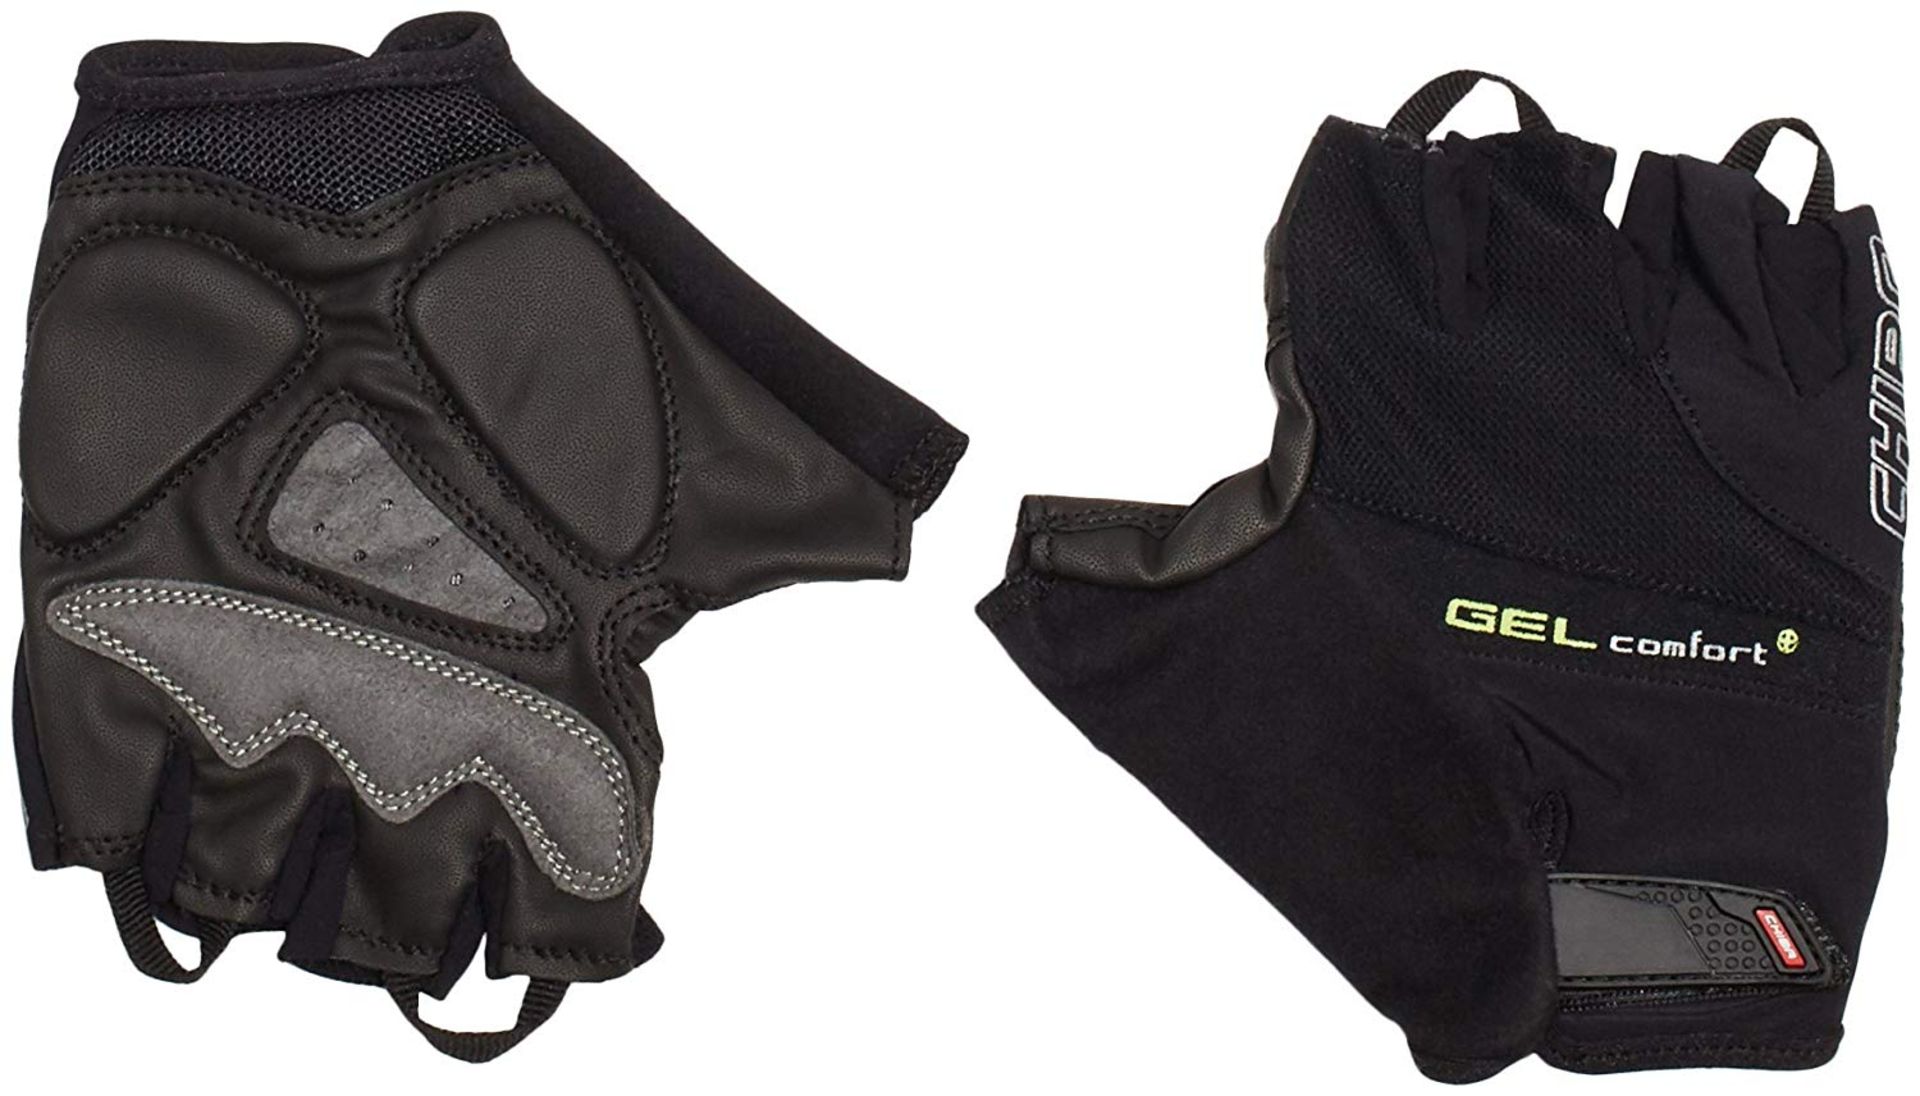 10 x Pairs of Men's Cycling Gloves | Total RRP £73.55 | See Description for Details - Image 6 of 6